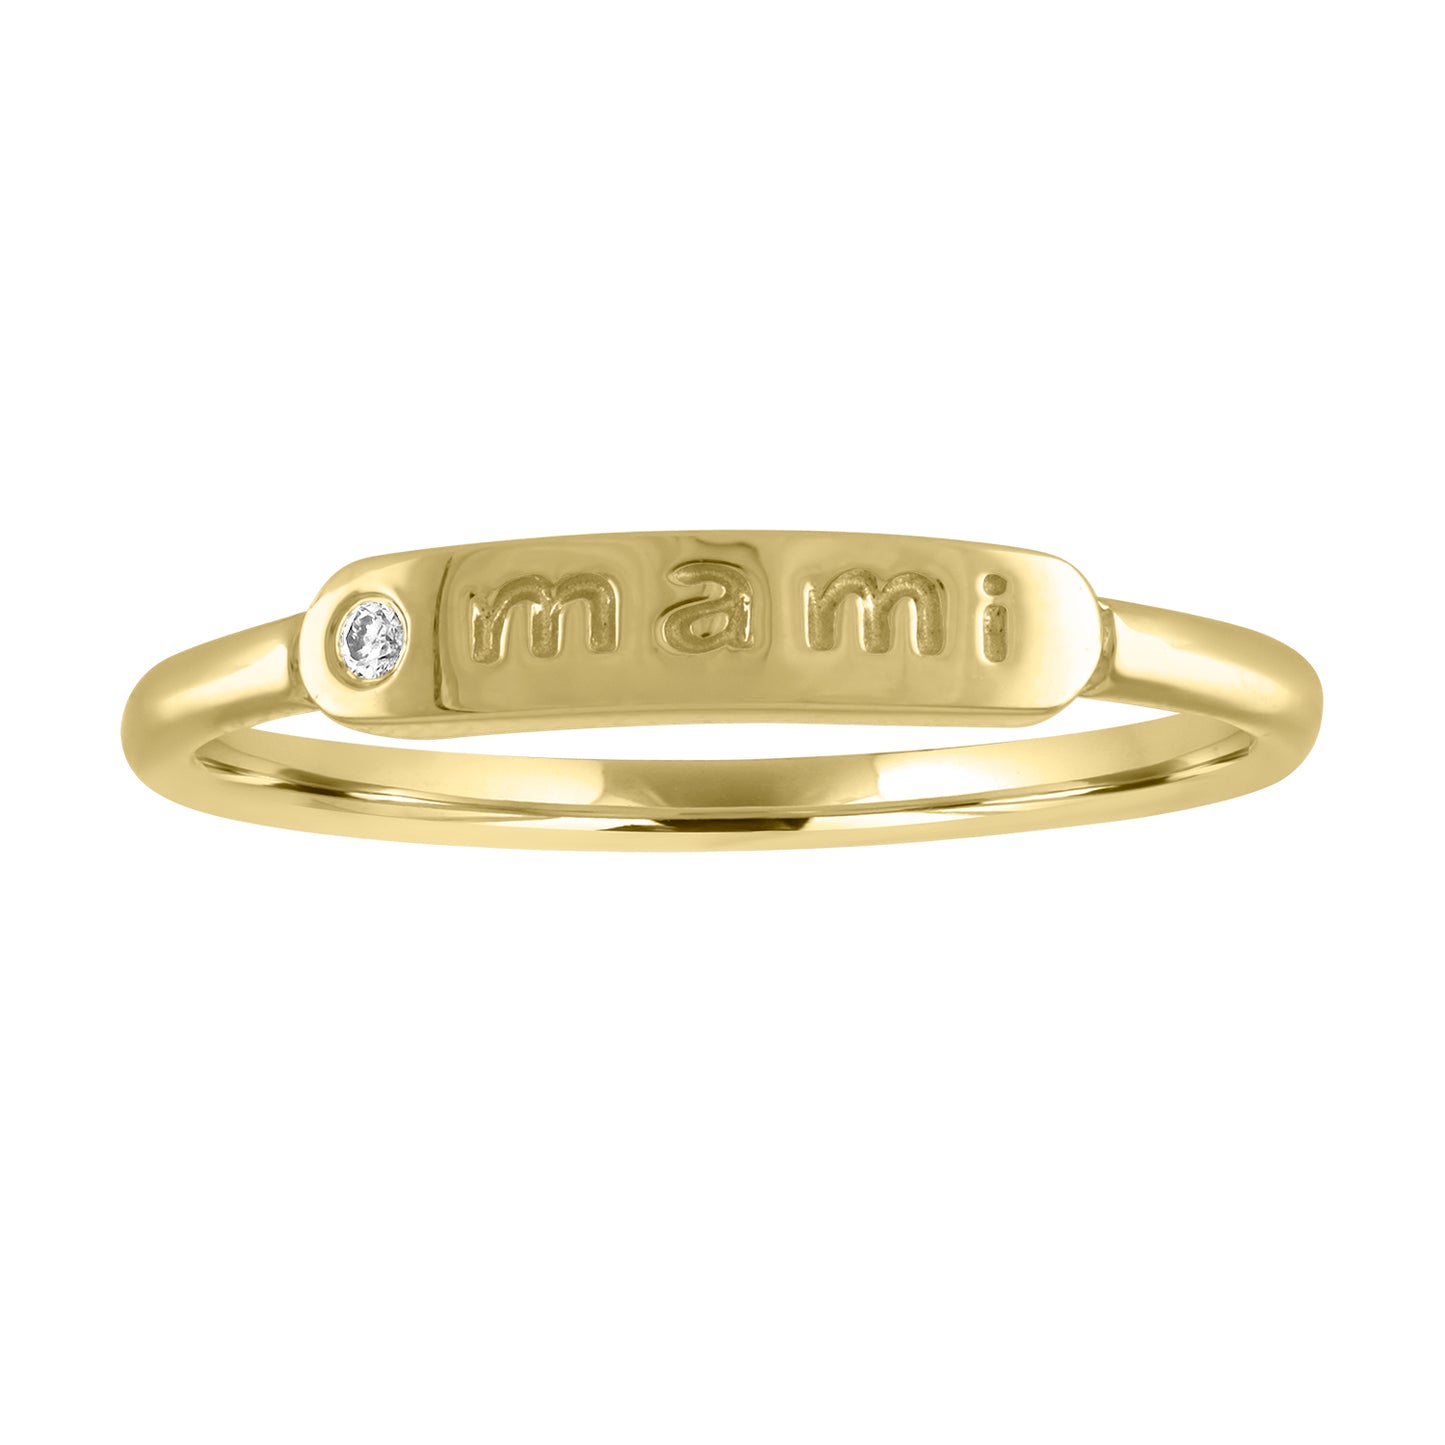 Yellow gold skinny band with mami in the center and round diamond.